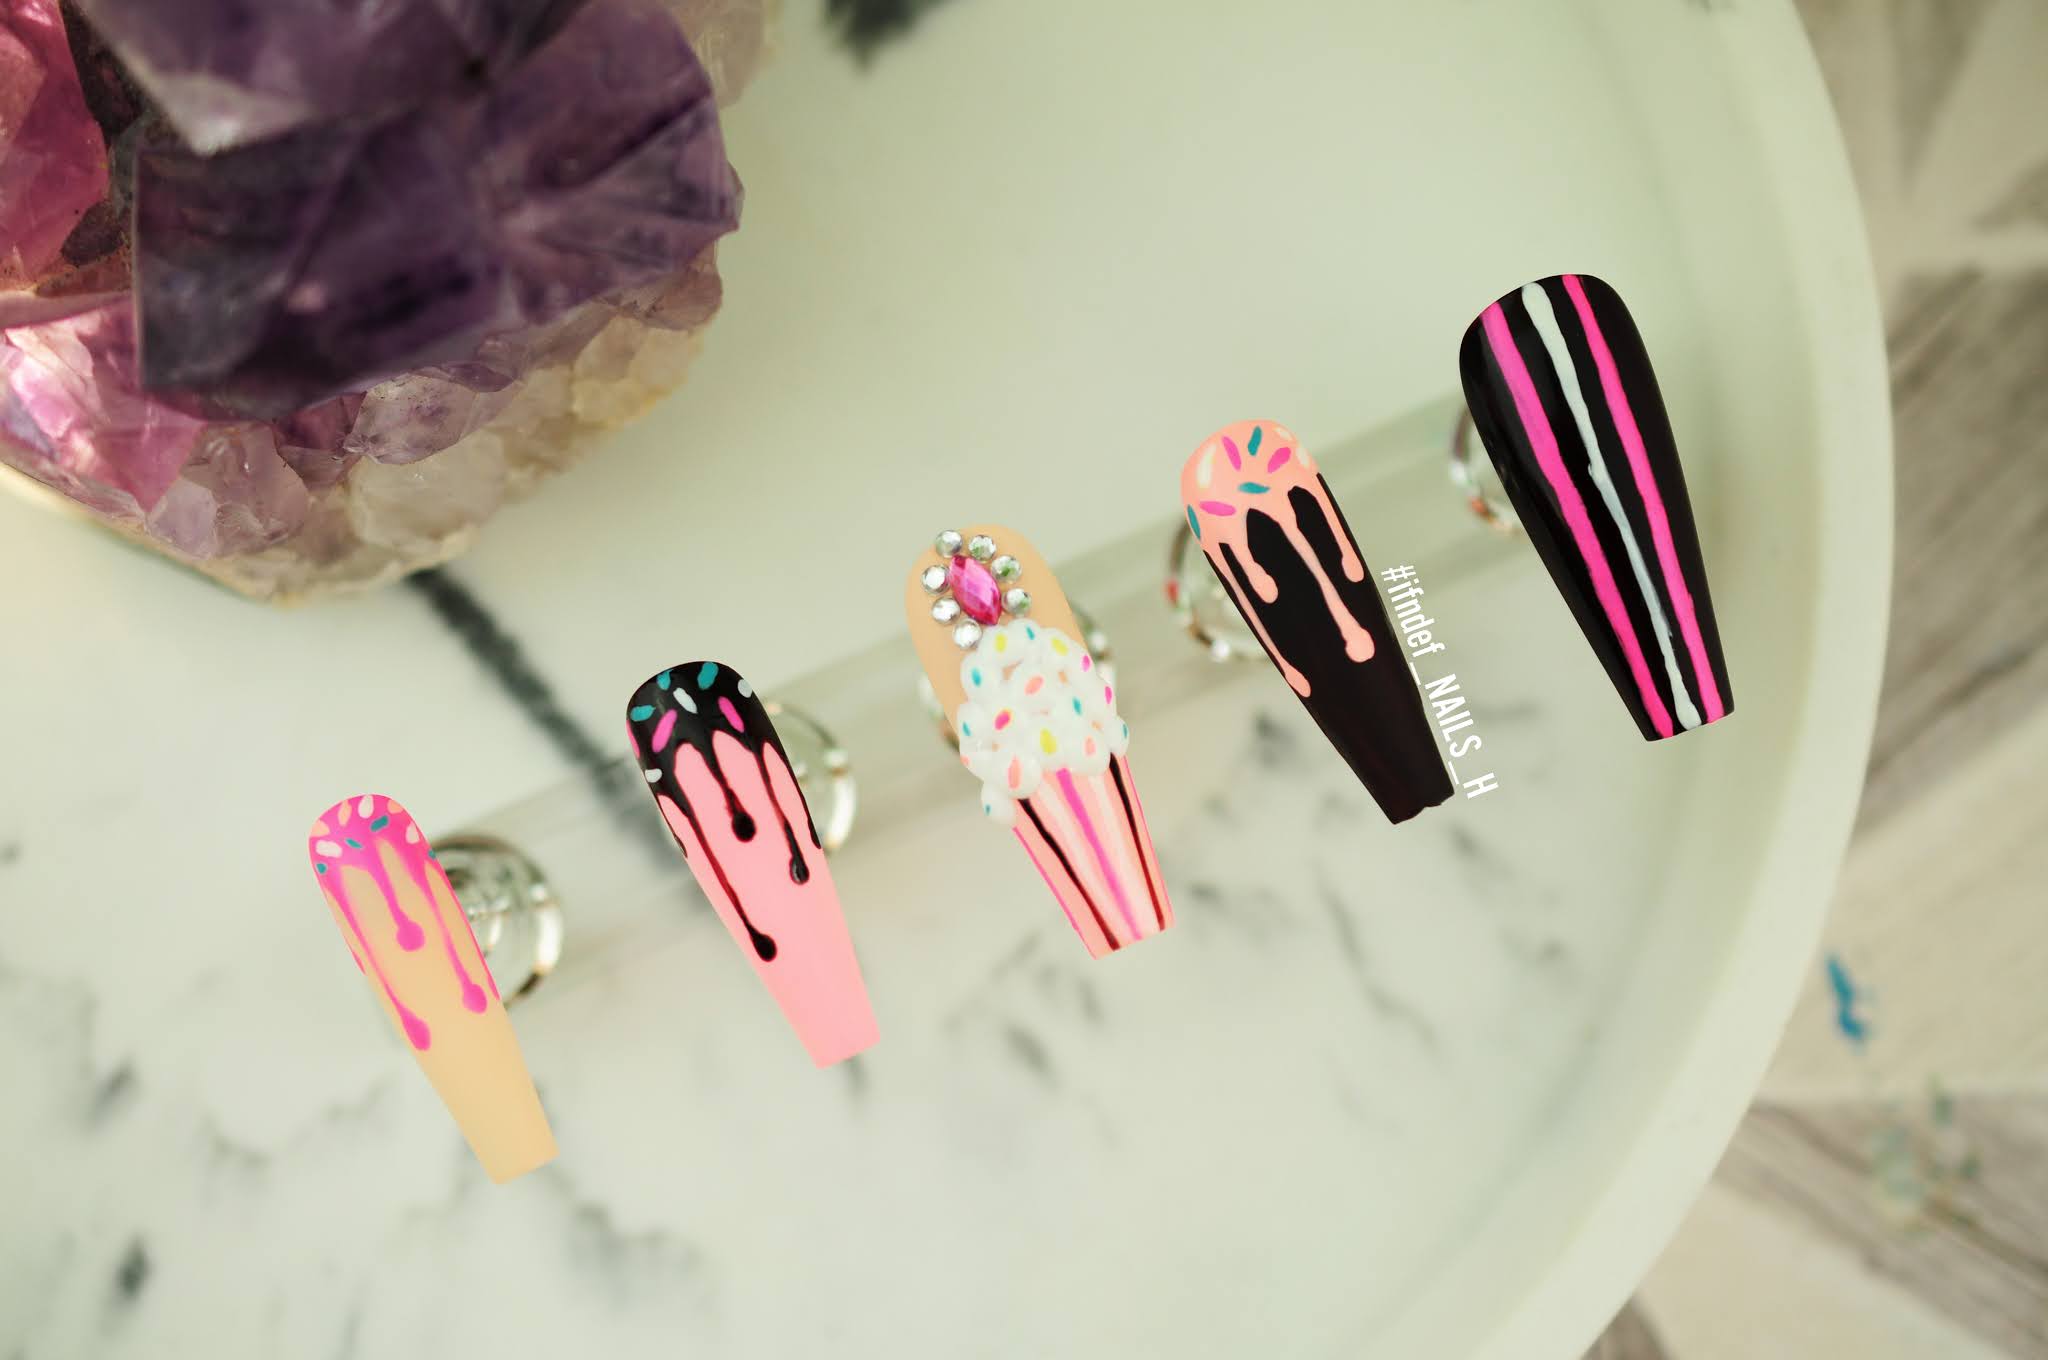 Ice cream Candy Brown, Pink Neon Ice Cream Drip Nails